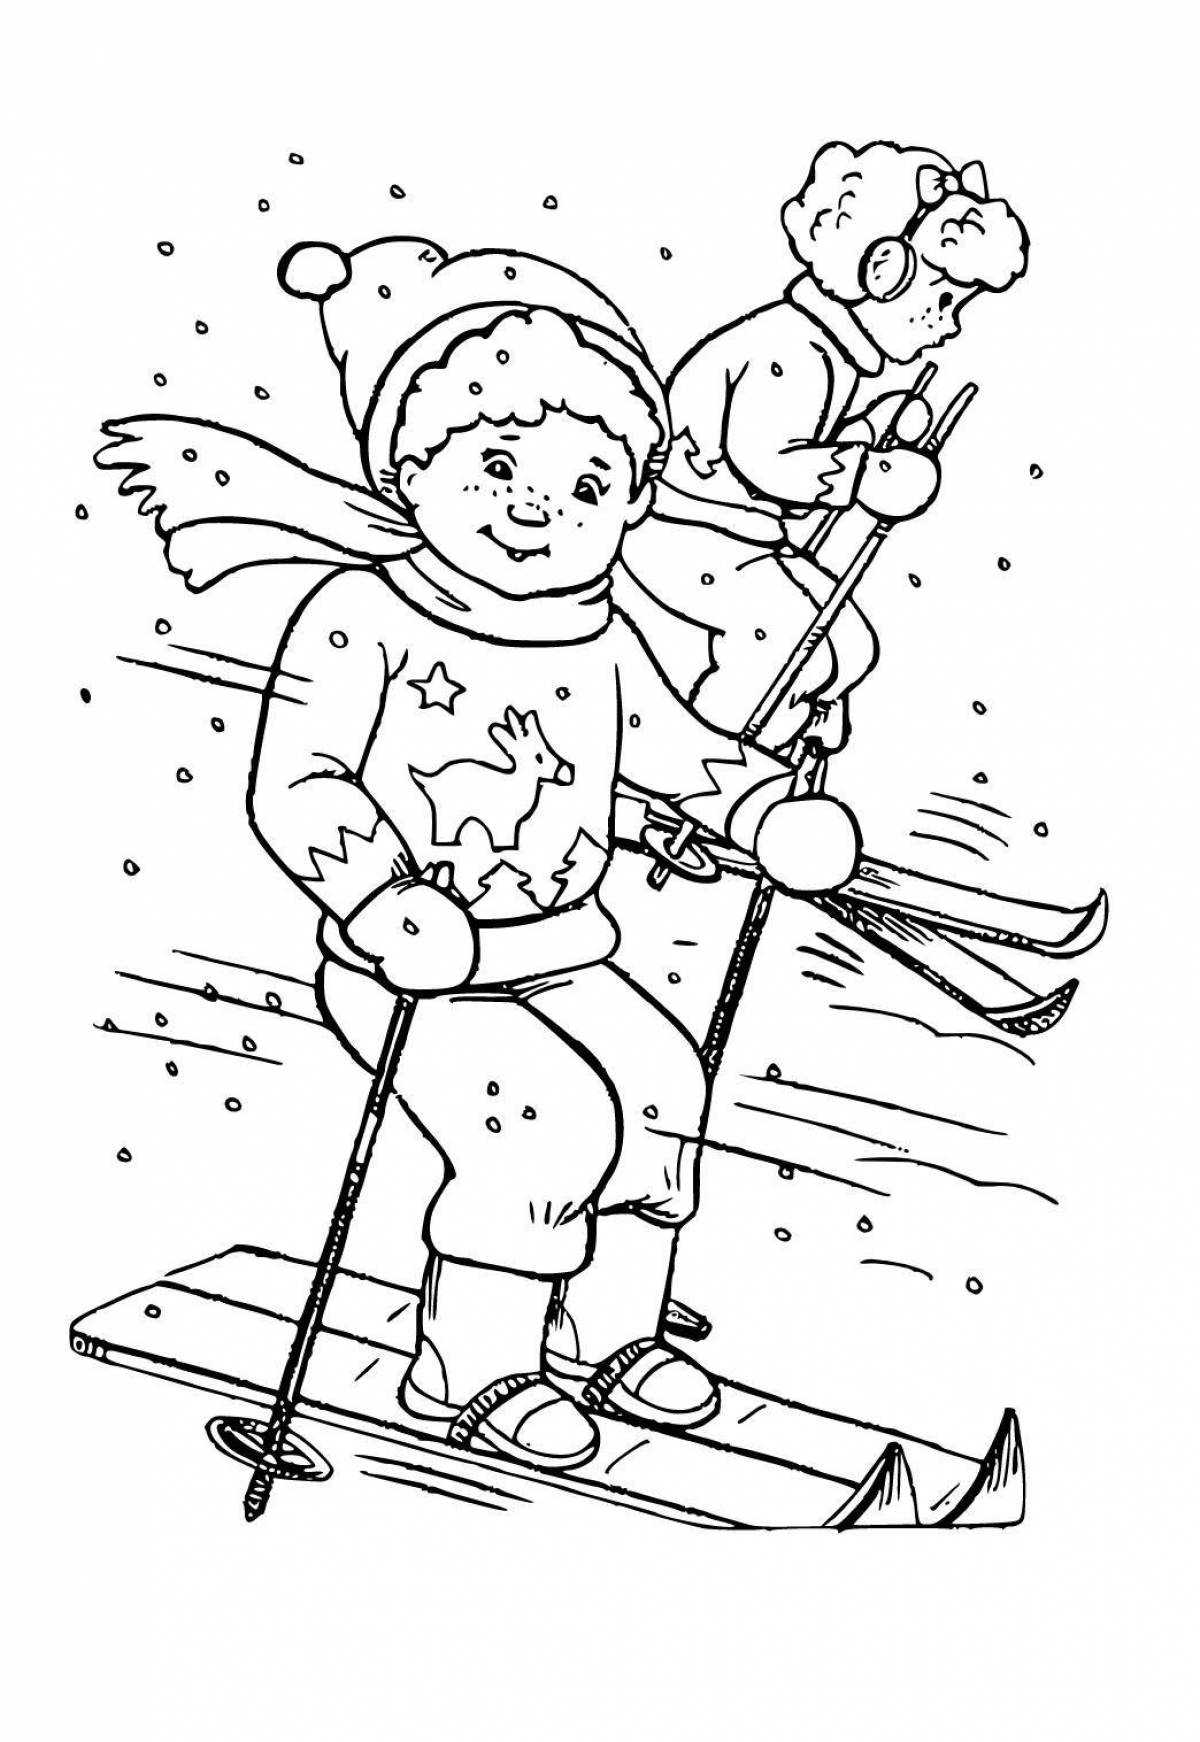 Coloring page cheeky boy on skis